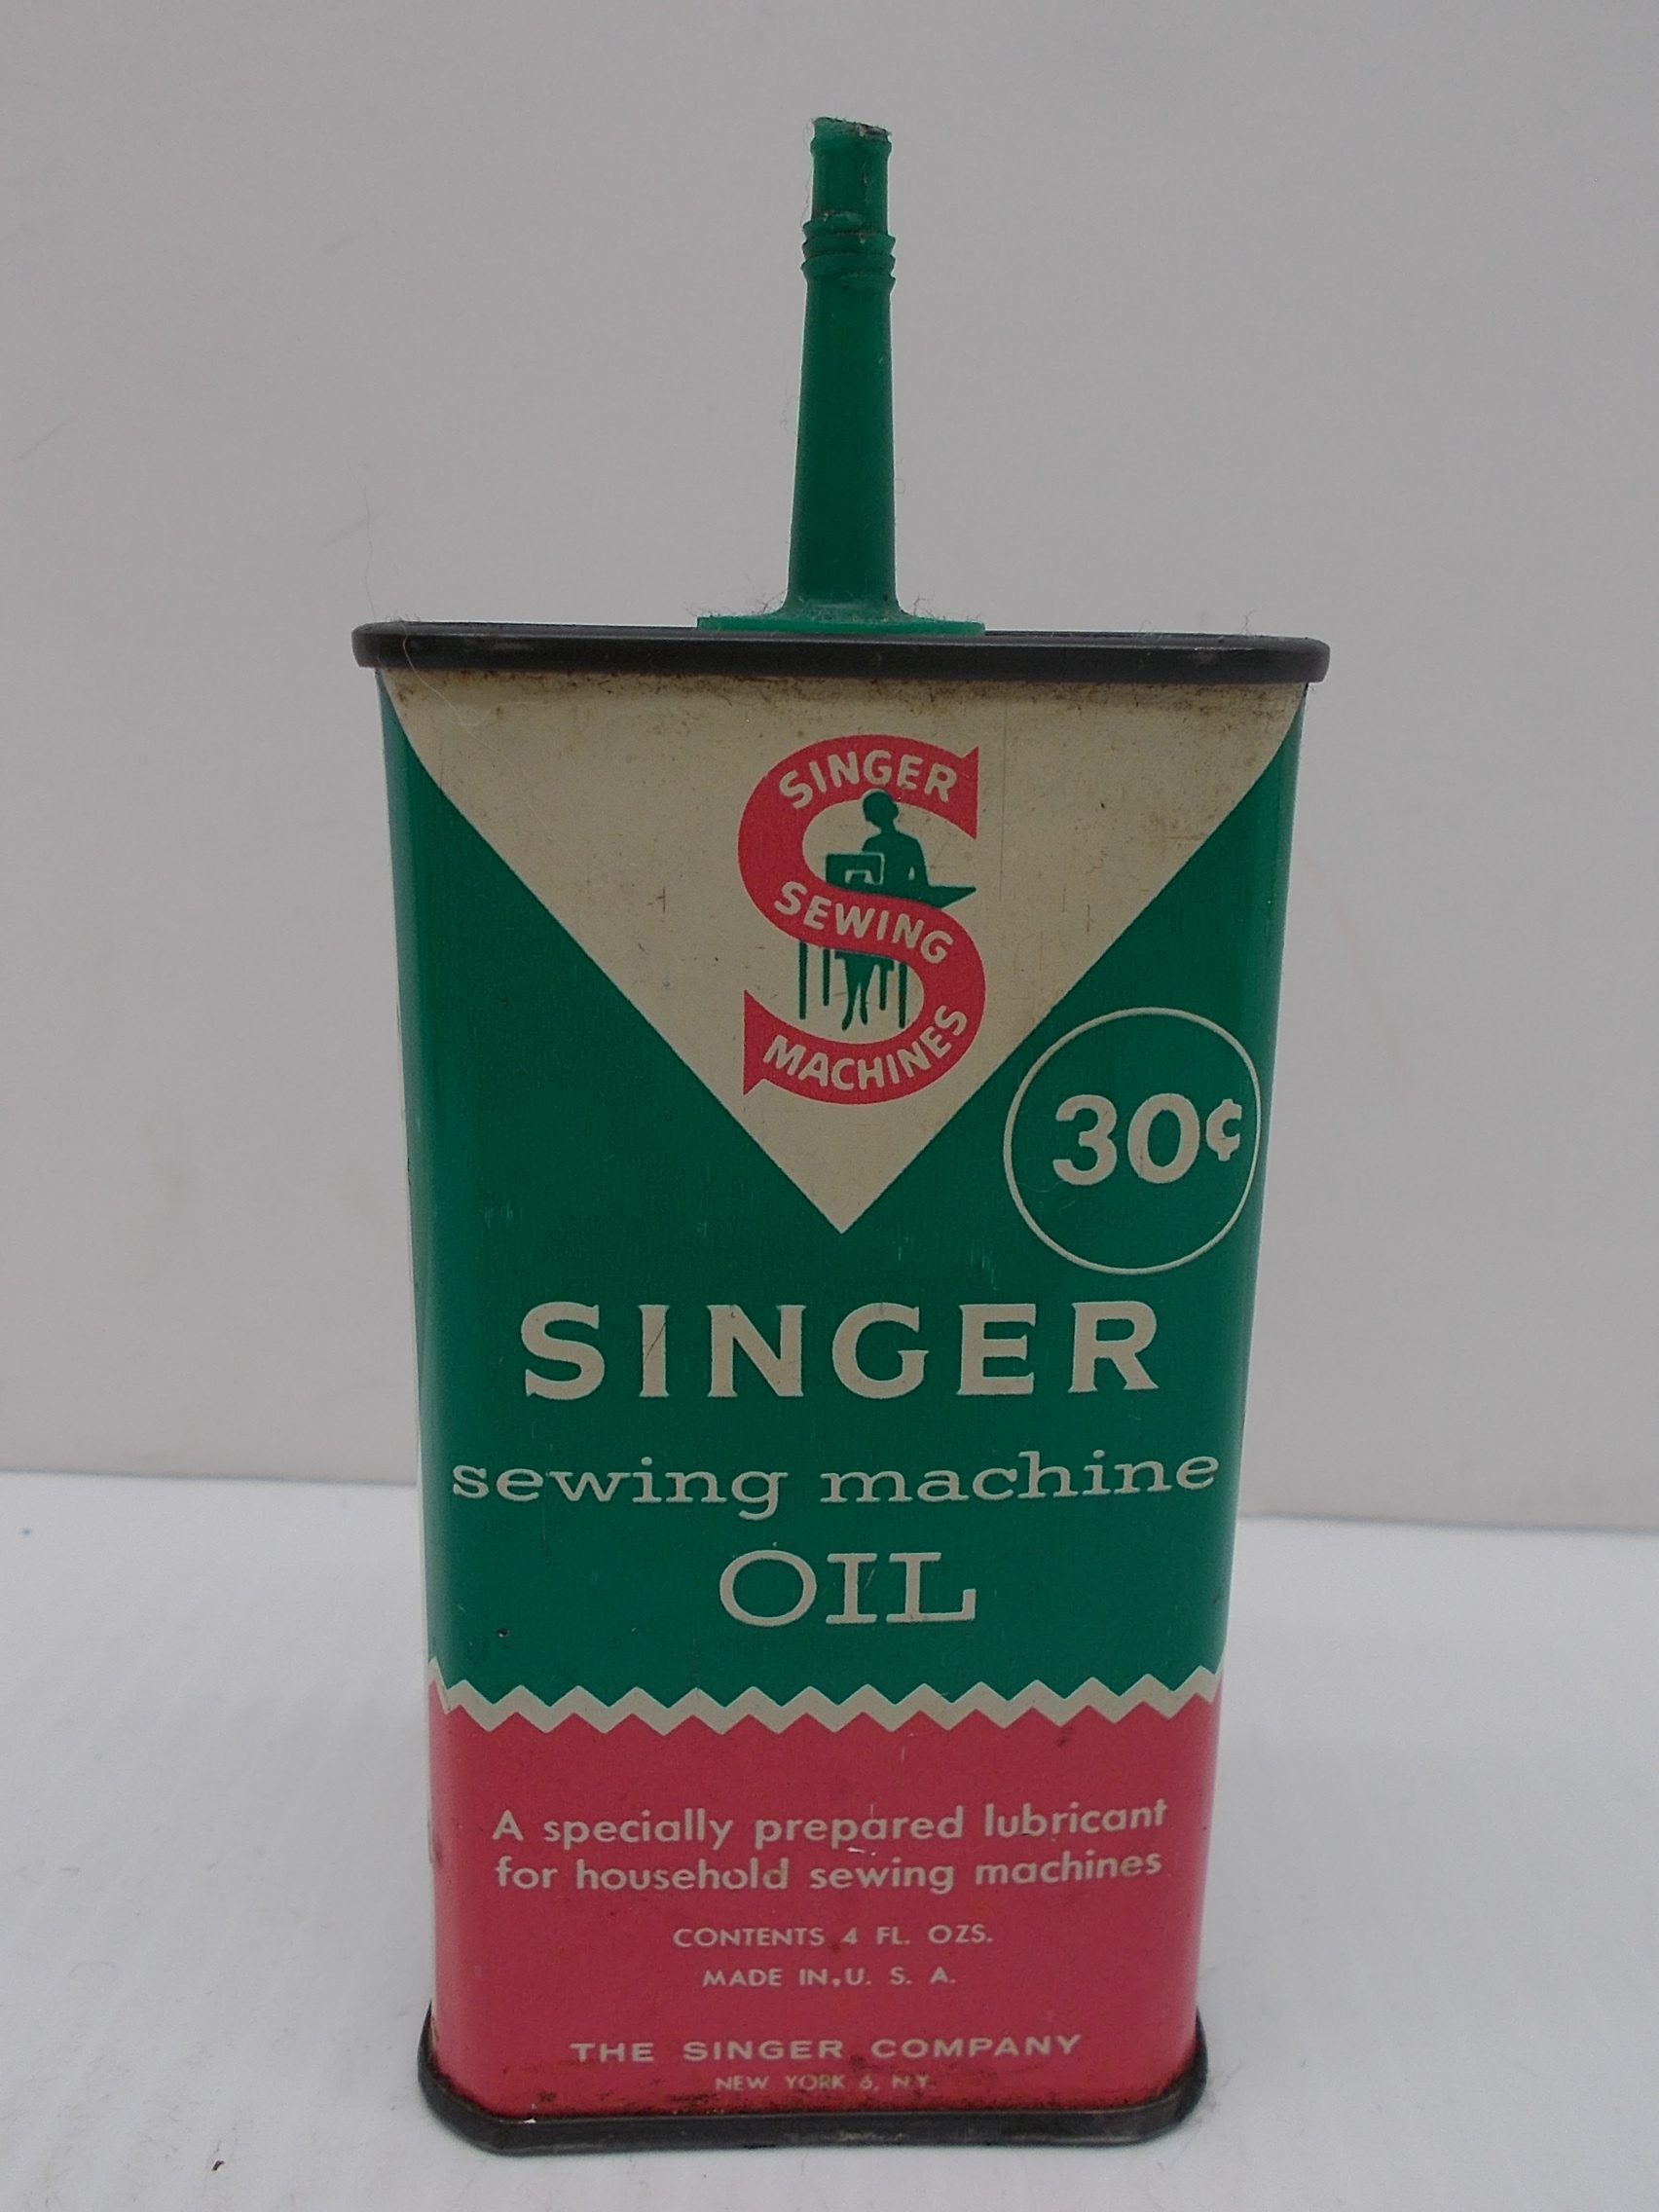 Singer Sewing Machine Oil Tin – Treasures Under Sugar Loaf – Antiques,  Collectibles, Home Decor and More